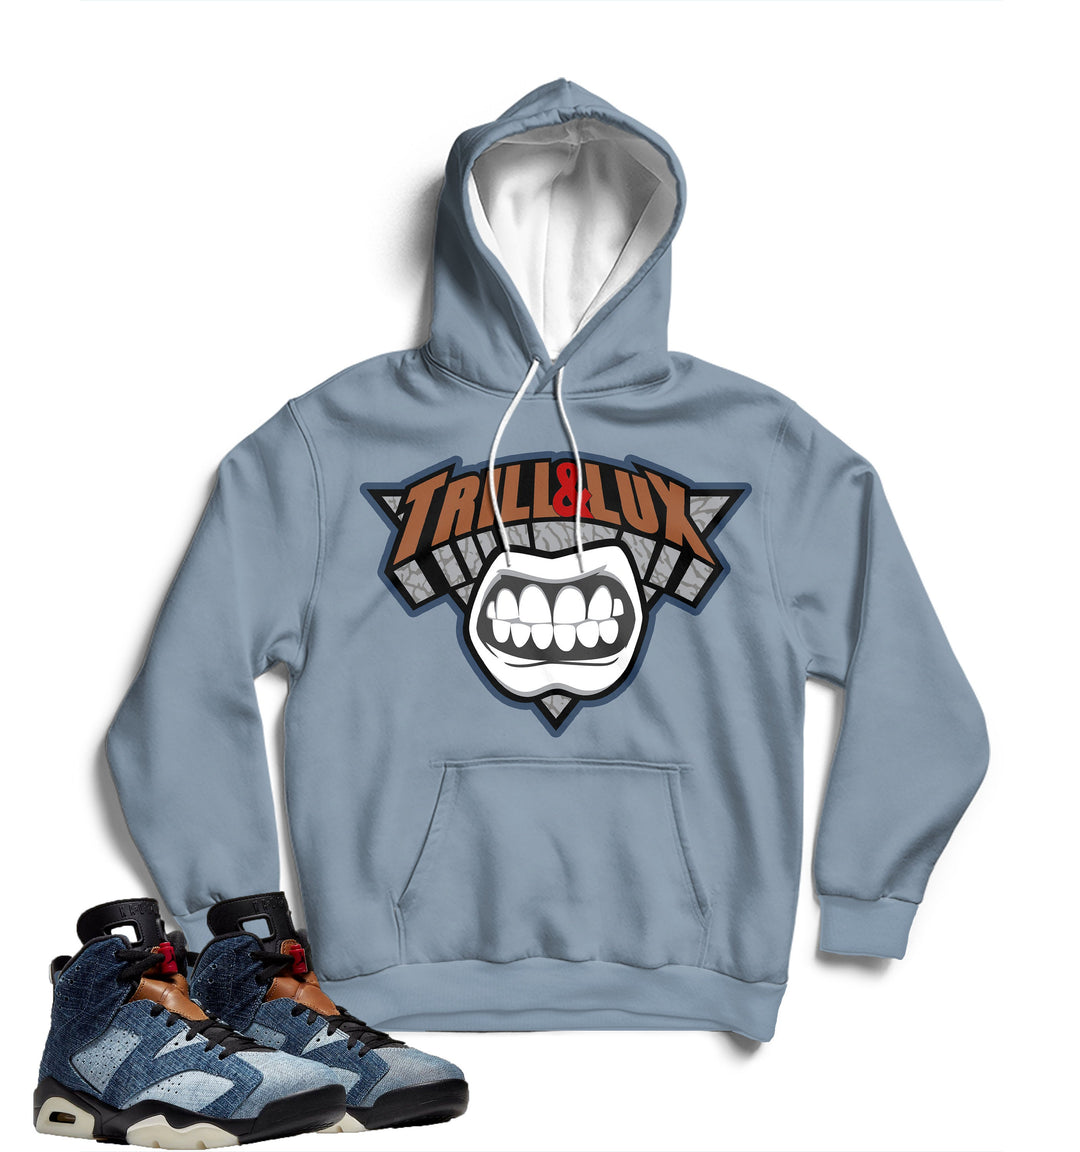 Trill And Lux | Grill Hoodie | Retro Jordan 6 Washed Denim Hood | Pullover |